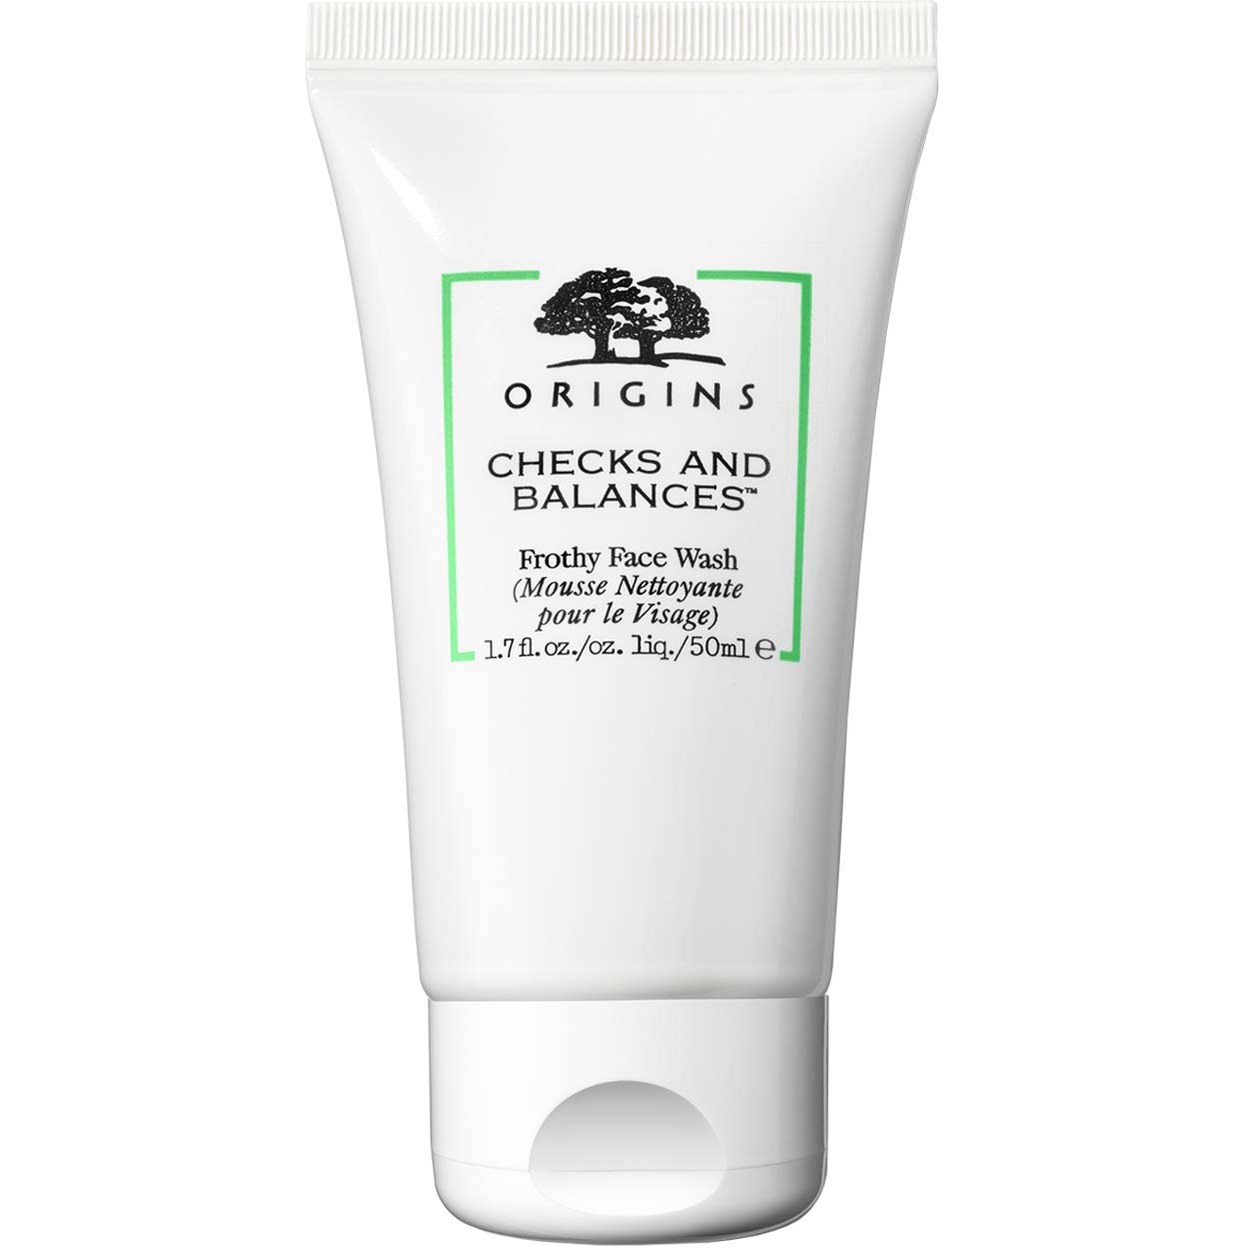 Origins Checks and Balances Frothy Face Wash Cleanser Travel Size 50 m